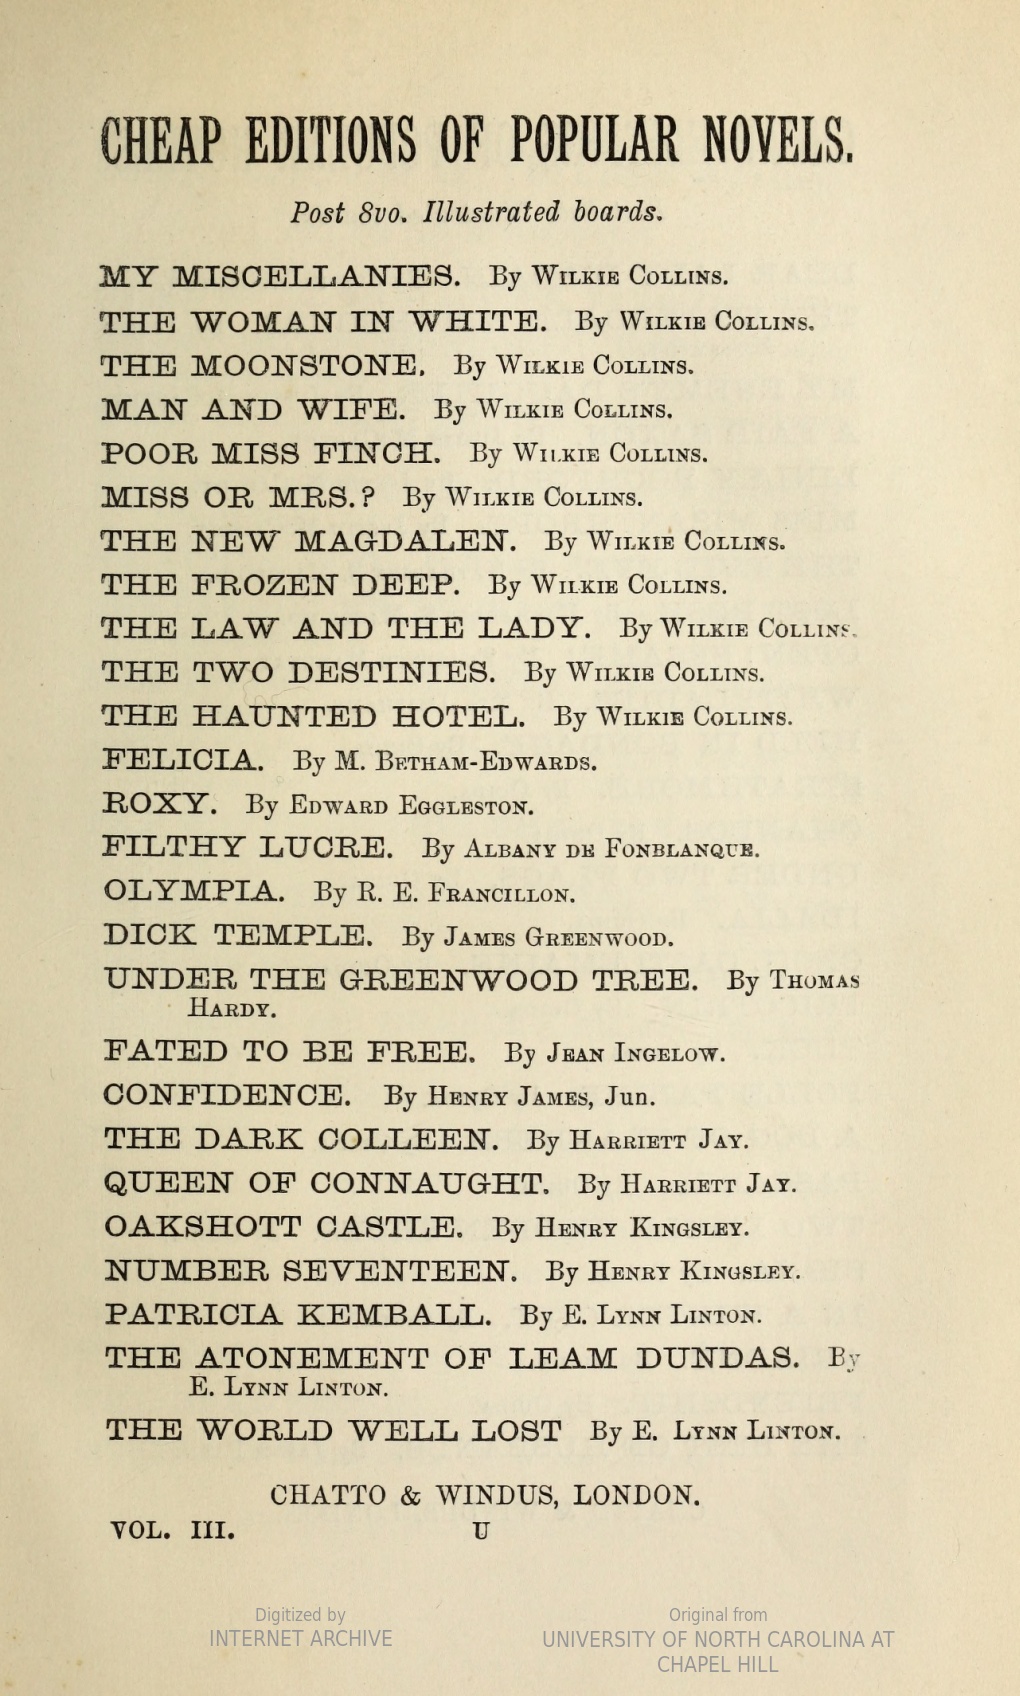 List of “Cheap Editions of Popular Novels” from the back pages of Queen Cophetua by R. E. Francillon (1880)